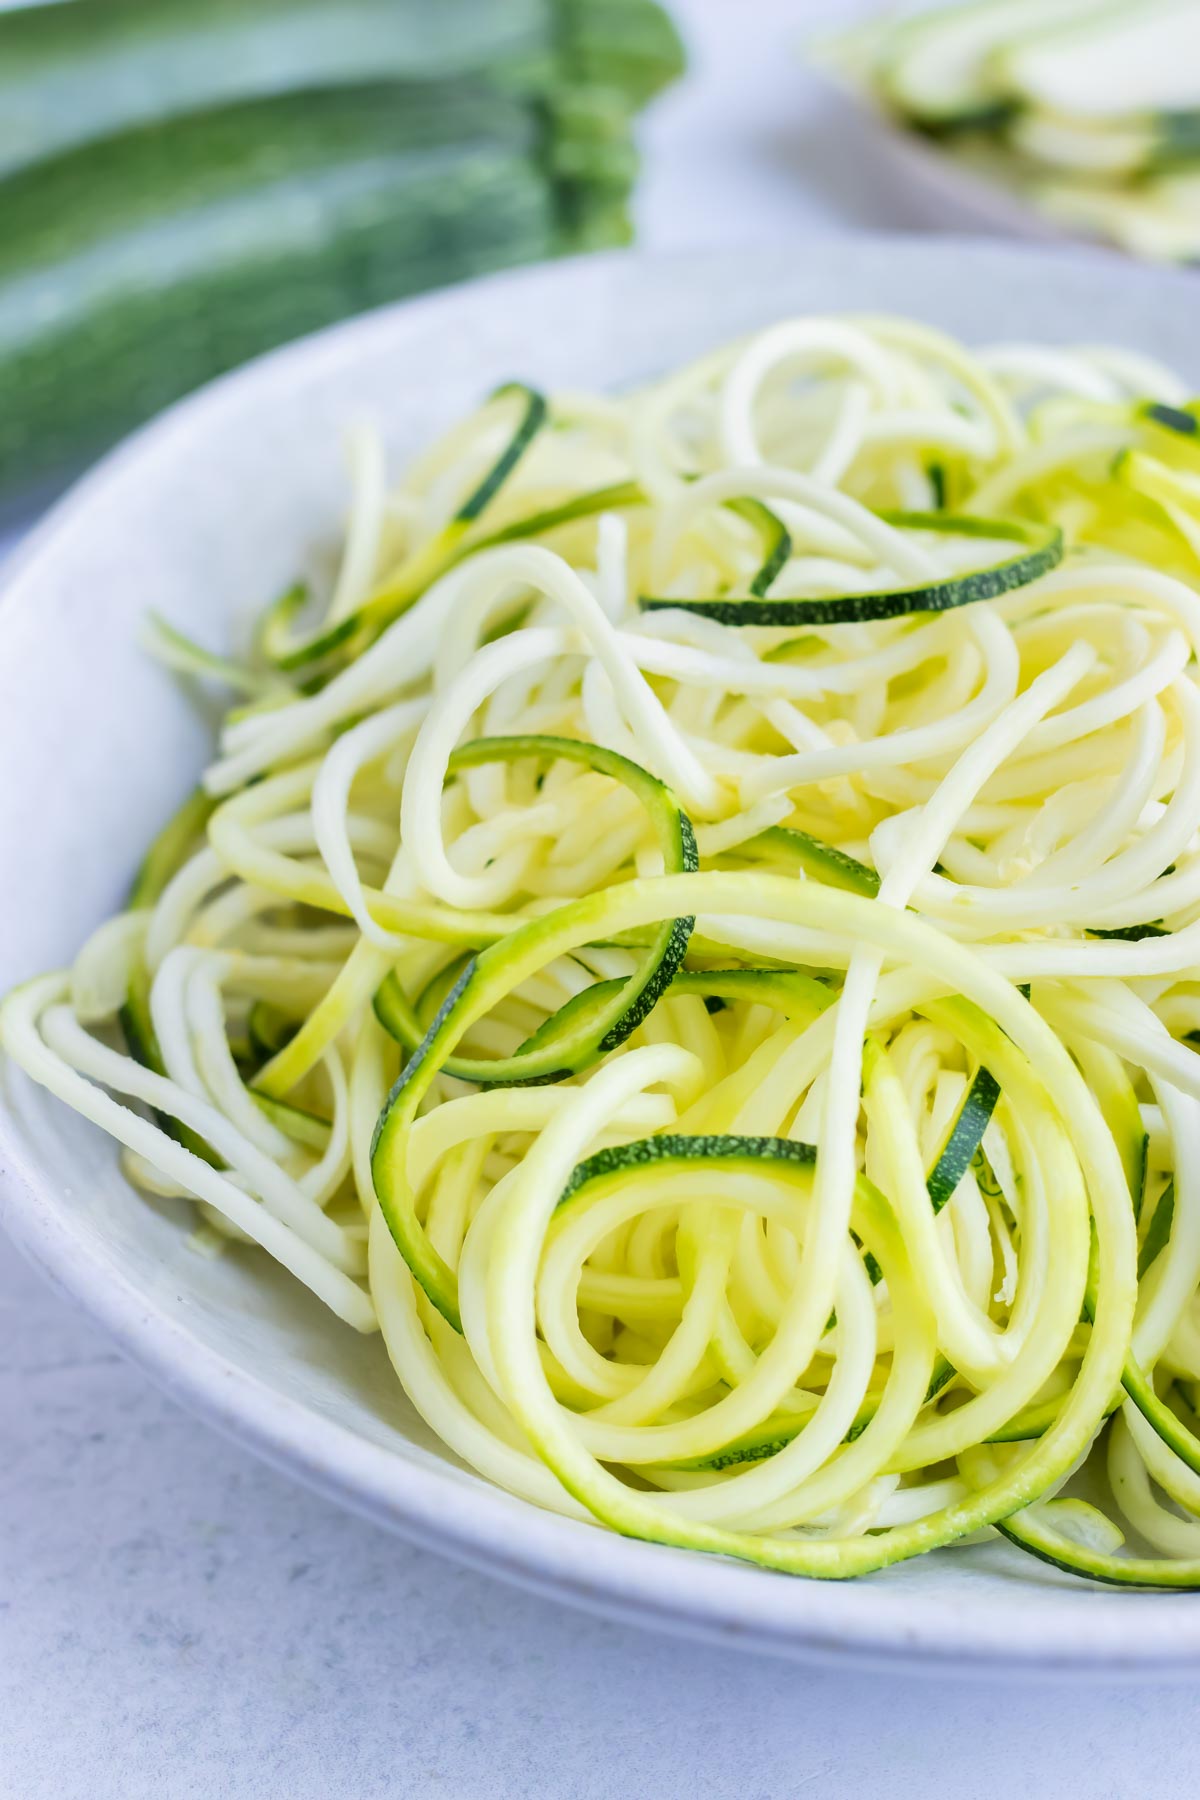 How To Make Zucchini Noodles (Ultimate Guide!)